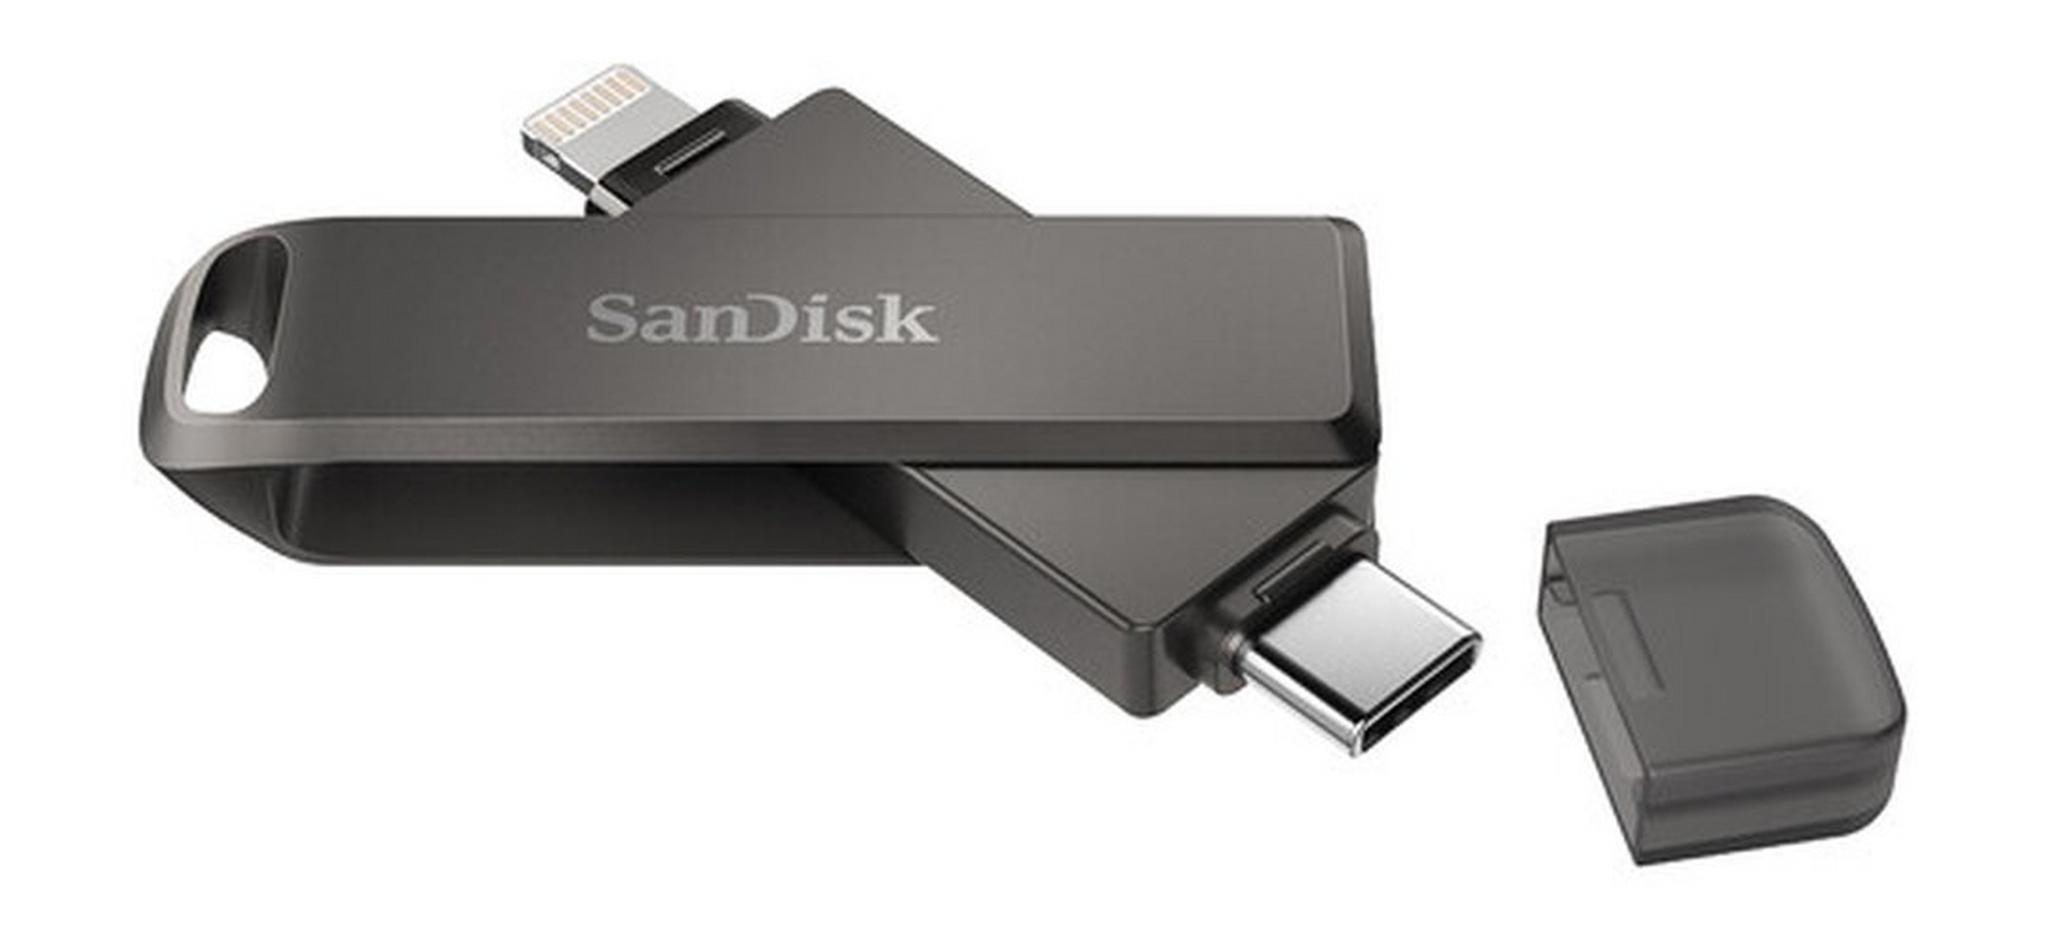 SanDisk 128GB iXpand Flash Drive Lux